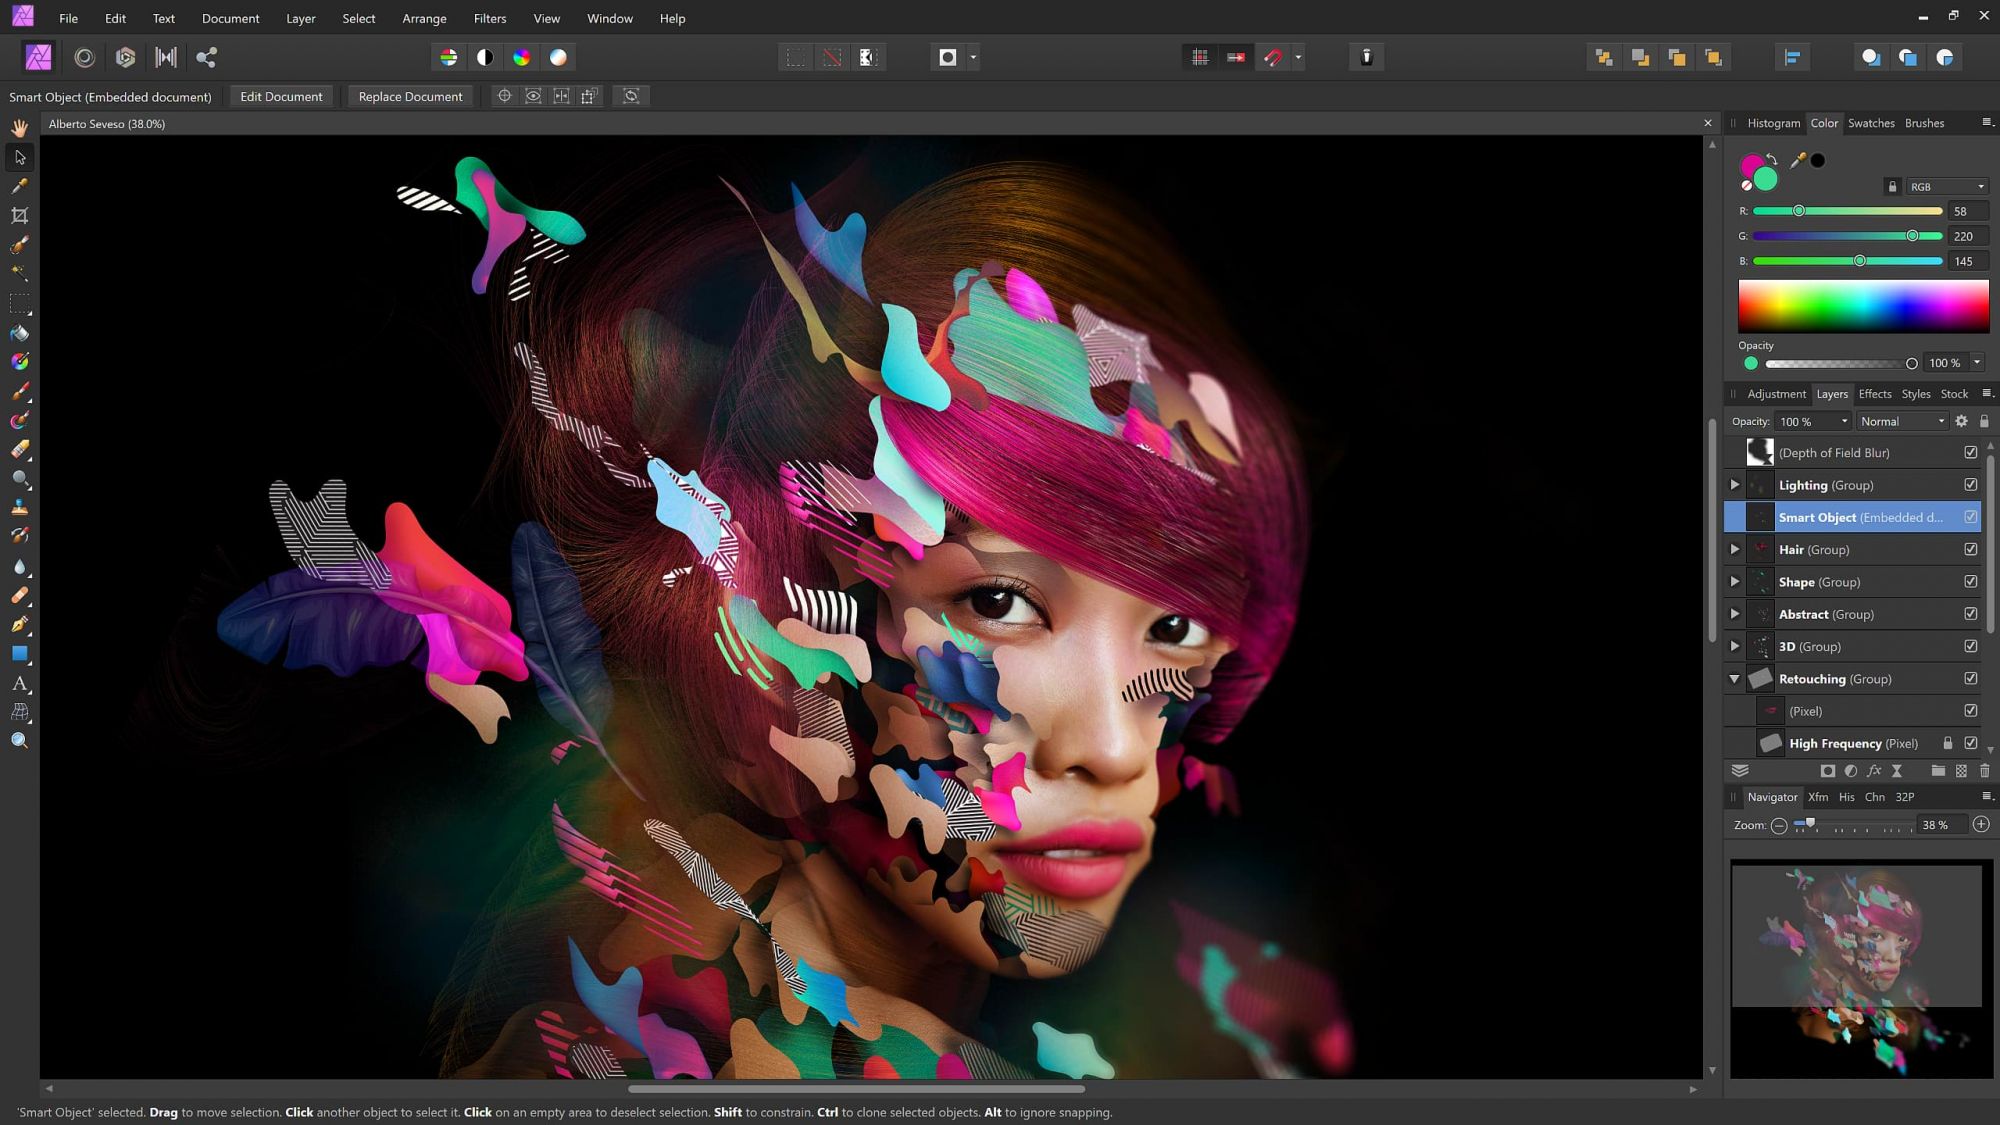 editing photos in affinity photo